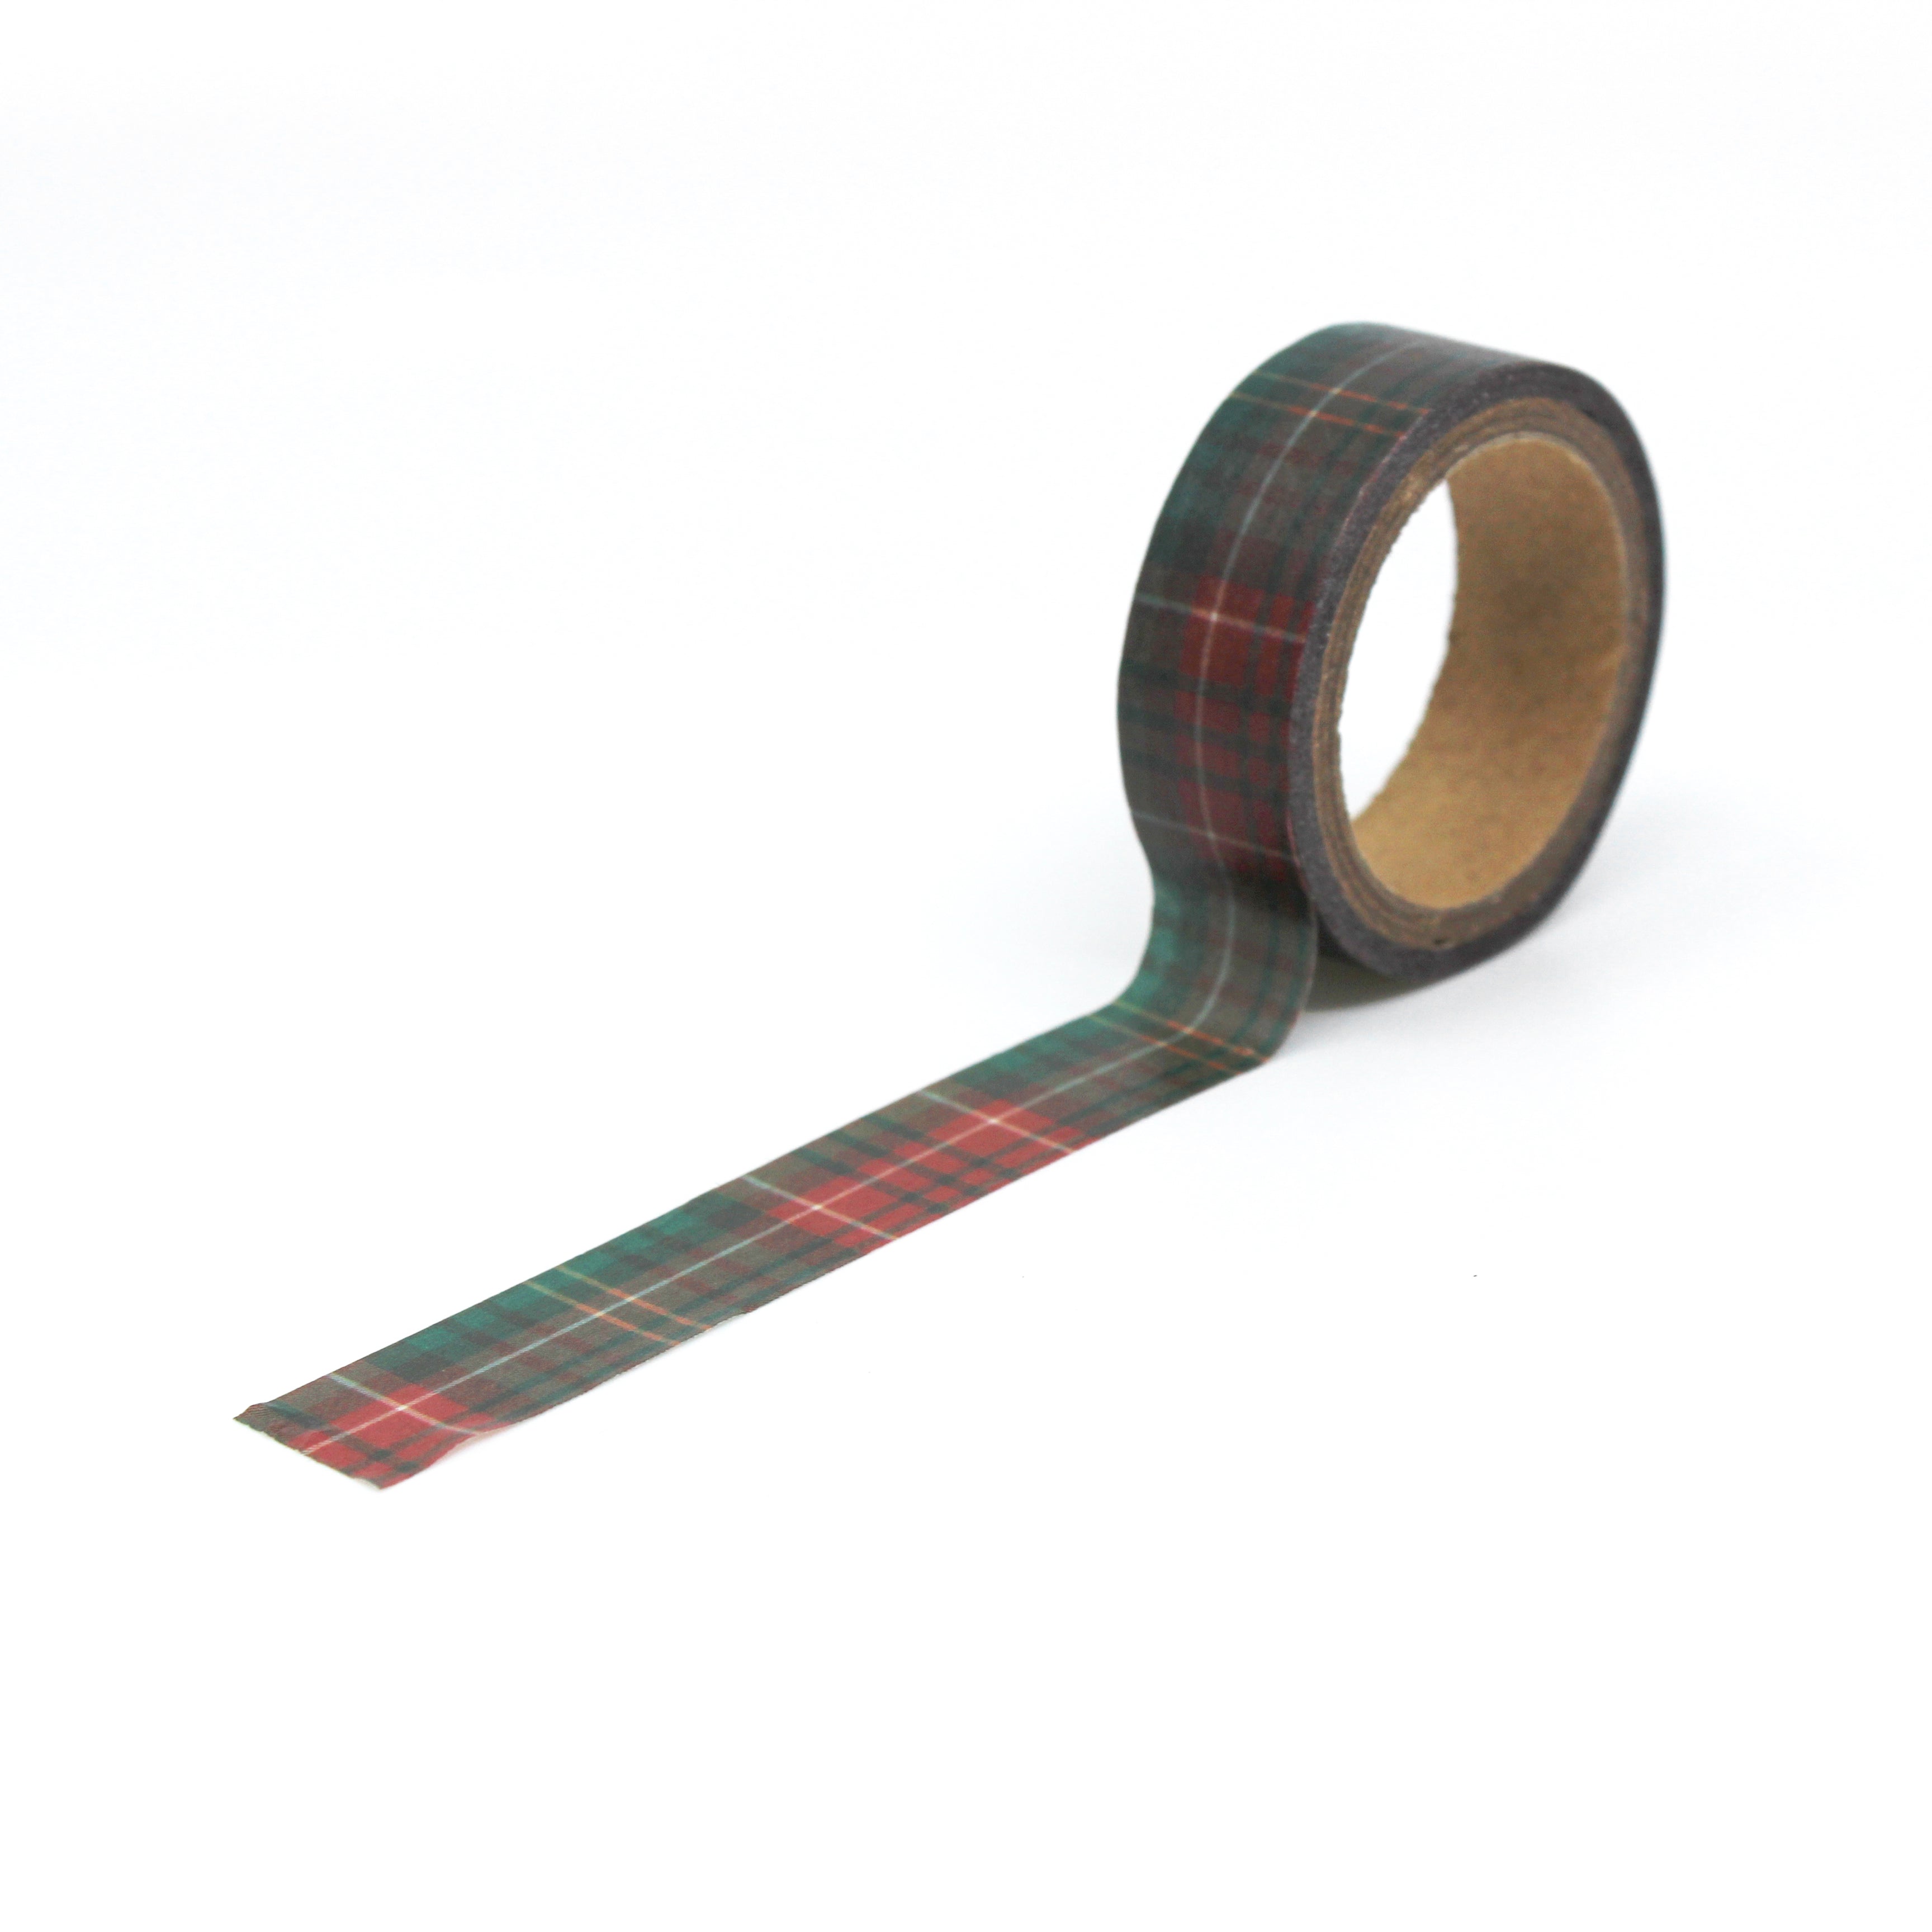 Celebrate the holiday season with our red and green holiday plaid washi tape, featuring a classic plaid pattern in festive Christmas colors, perfect for adding a touch of timeless holiday charm to your crafts. This tape is sold at BBB Supplies Craft Shop.